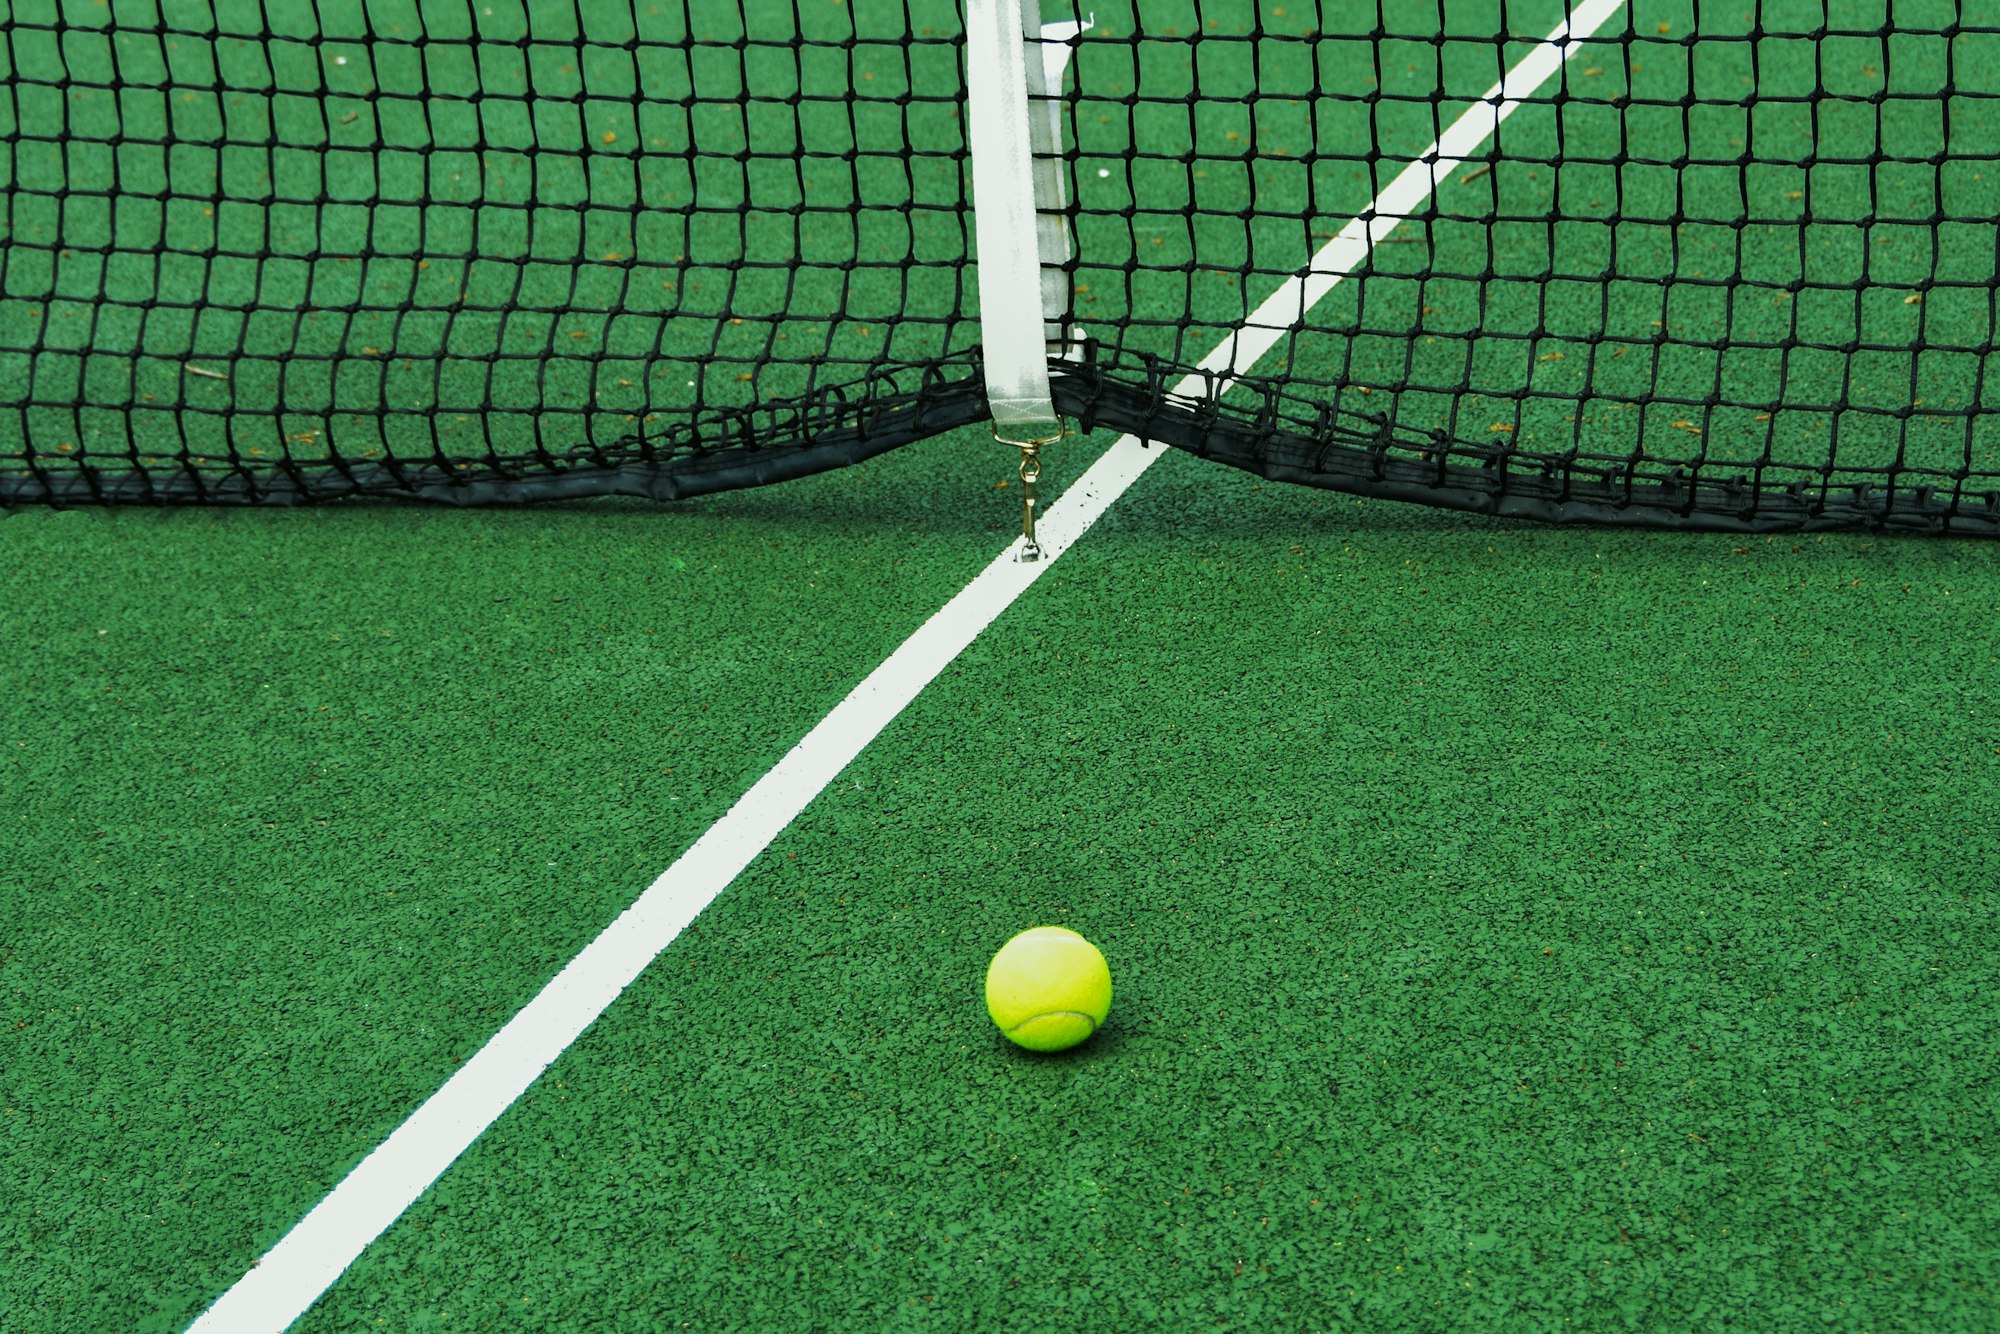 How To Play The Net in Doubles Tennis